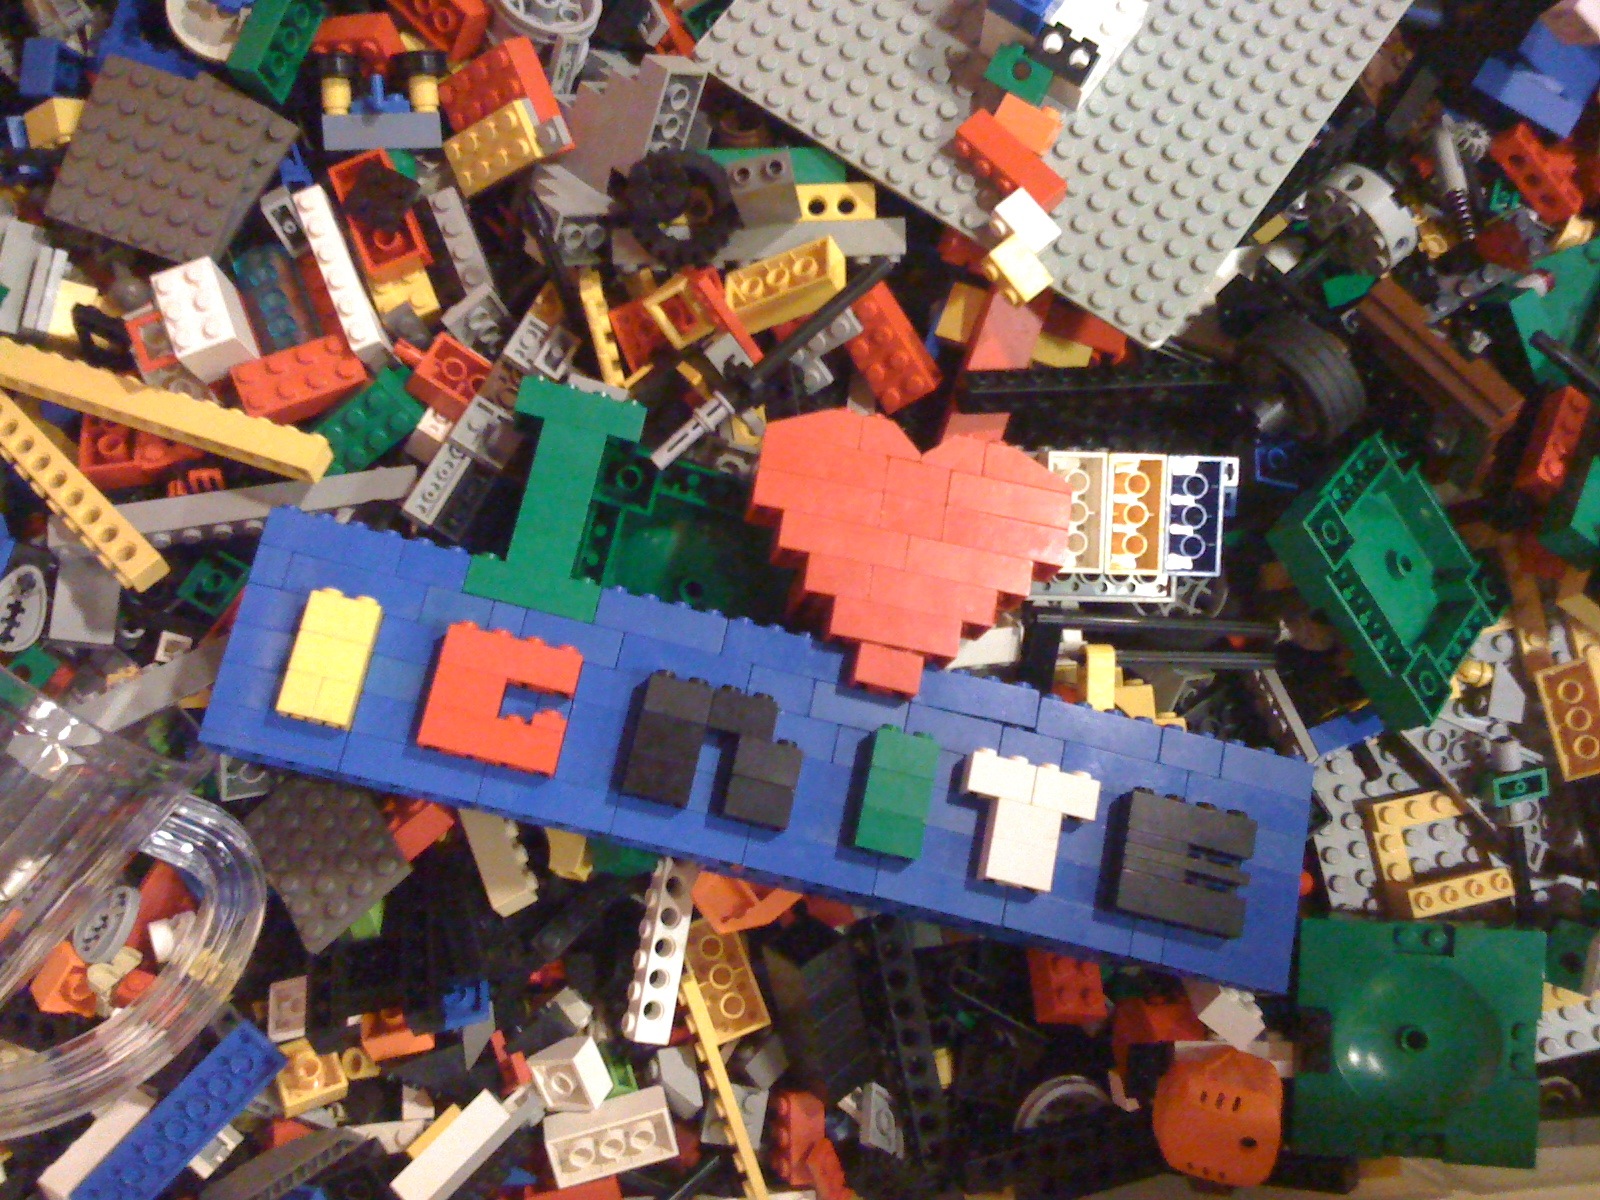 A bin full of varied and colourful Lego pieces